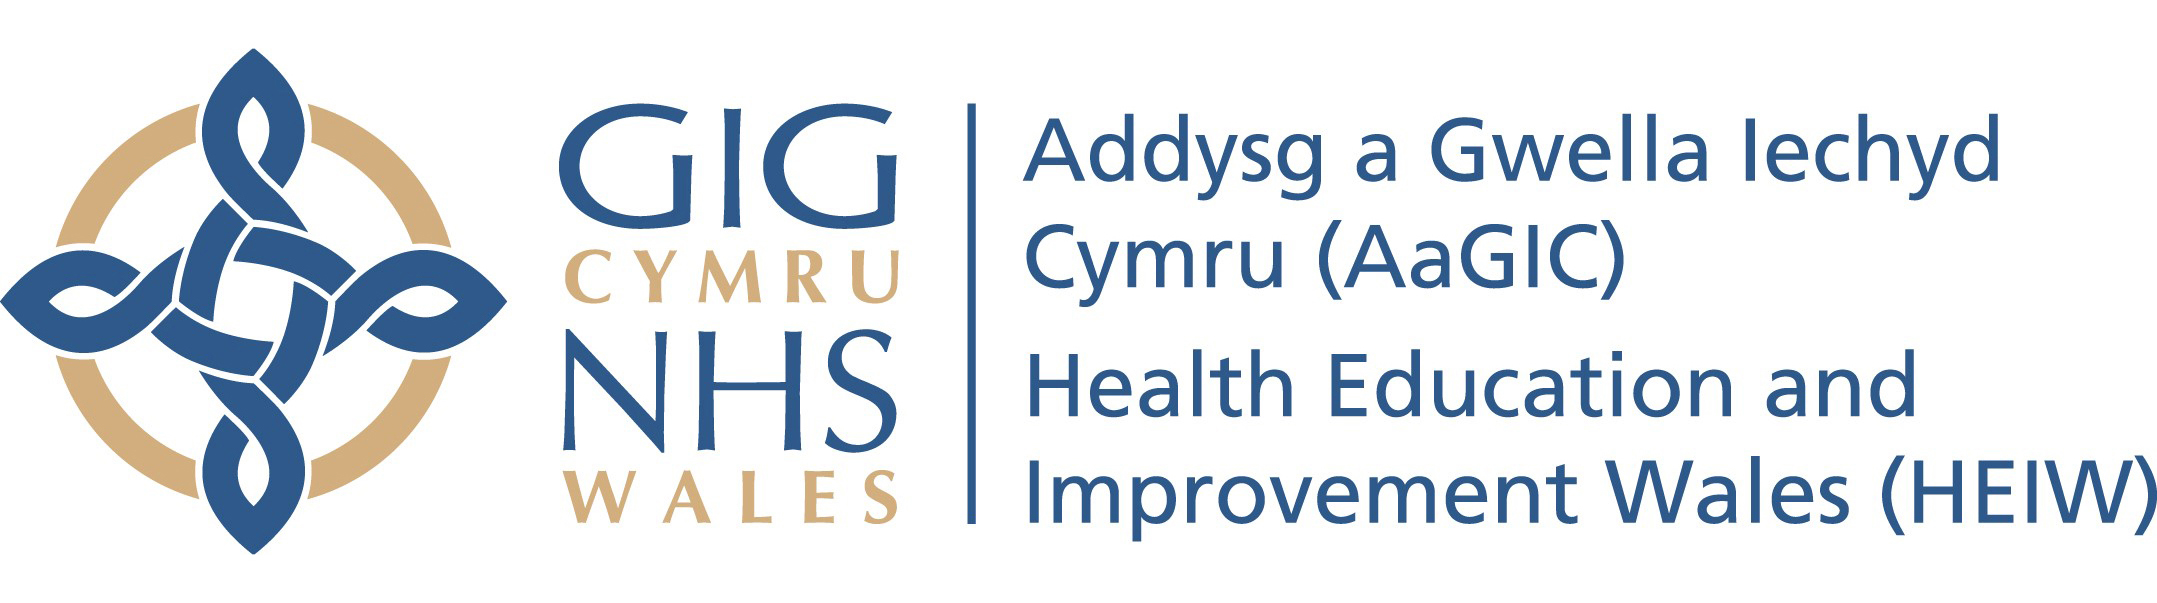 Health Education and Improvement with NHS Wales Logo